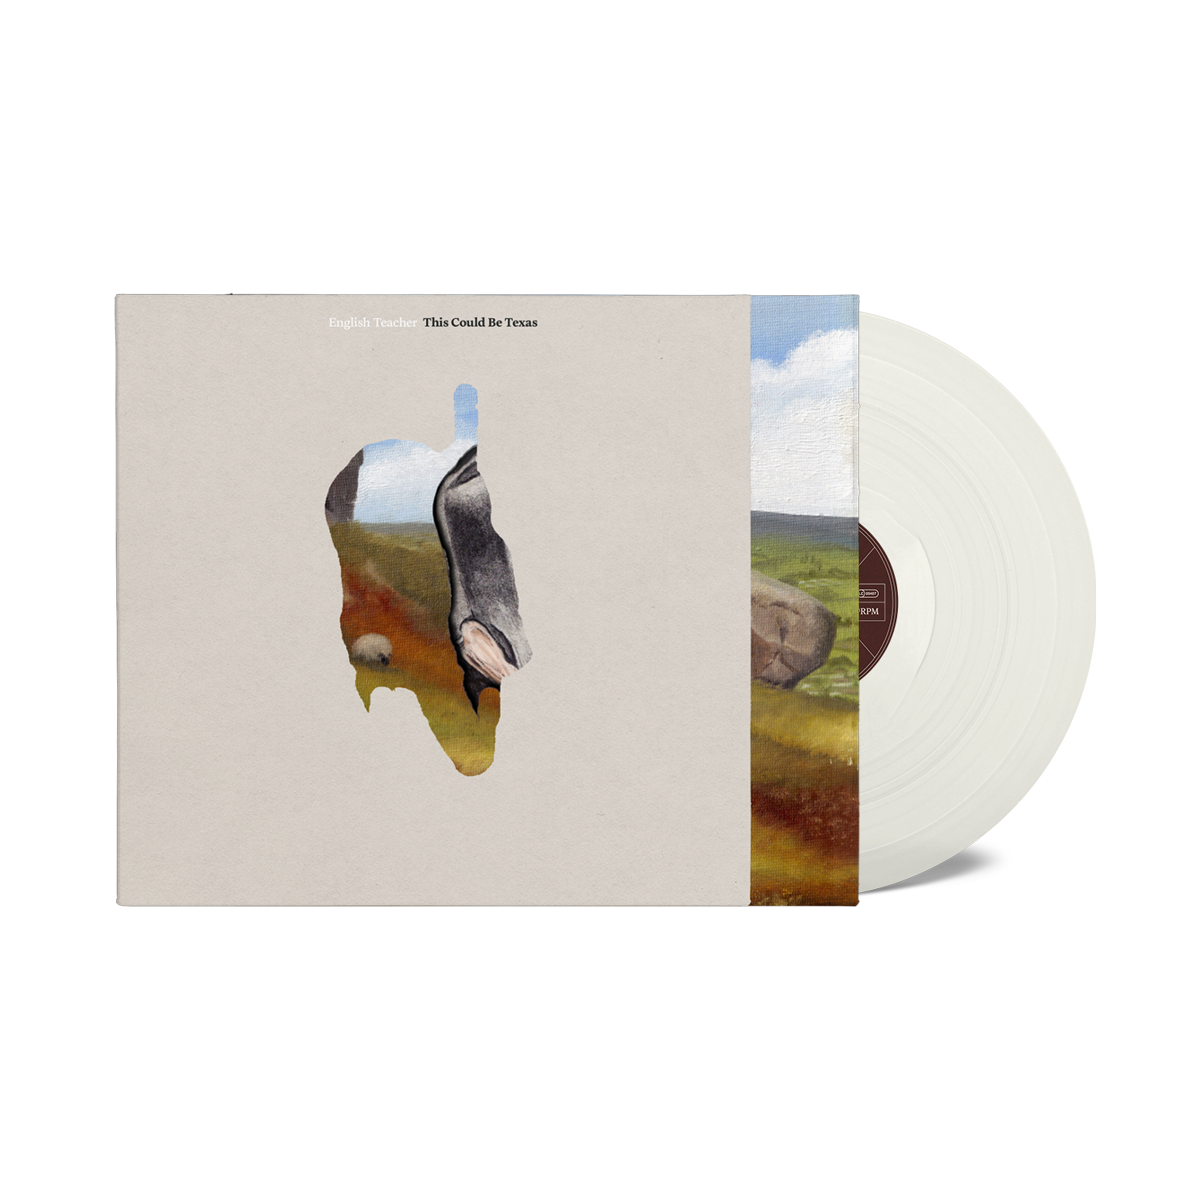 This Could be Texas: Limited Milky White Vinyl LP + Exclusive Signed Art Card